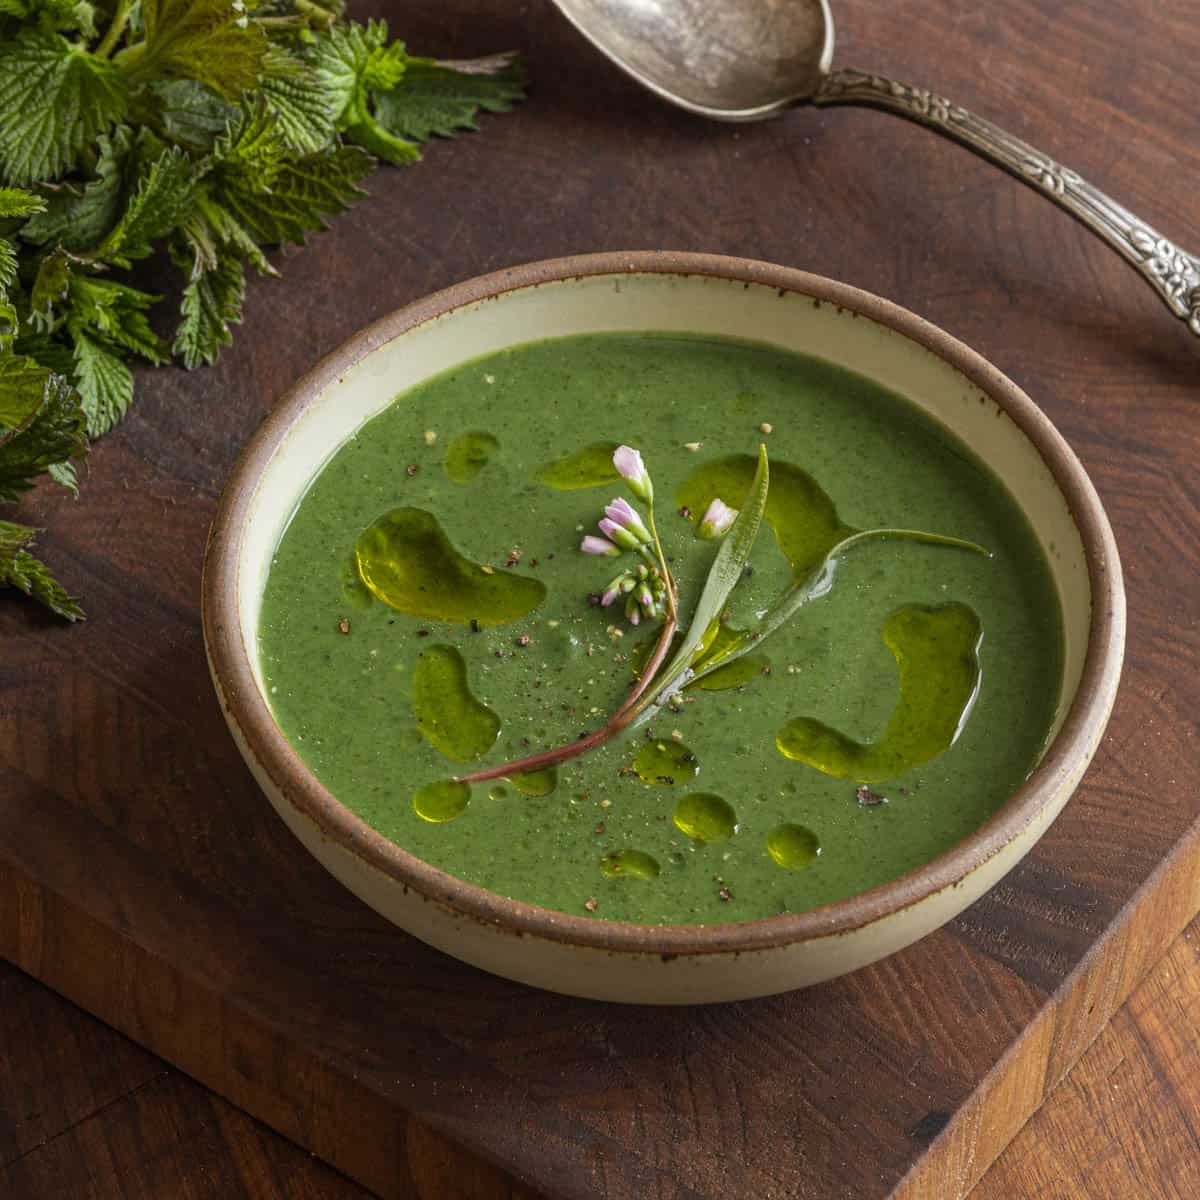 a bowl of dark green stinging nettle soup garnished with spring beauty on a cutting board next to fresh nettle greens.